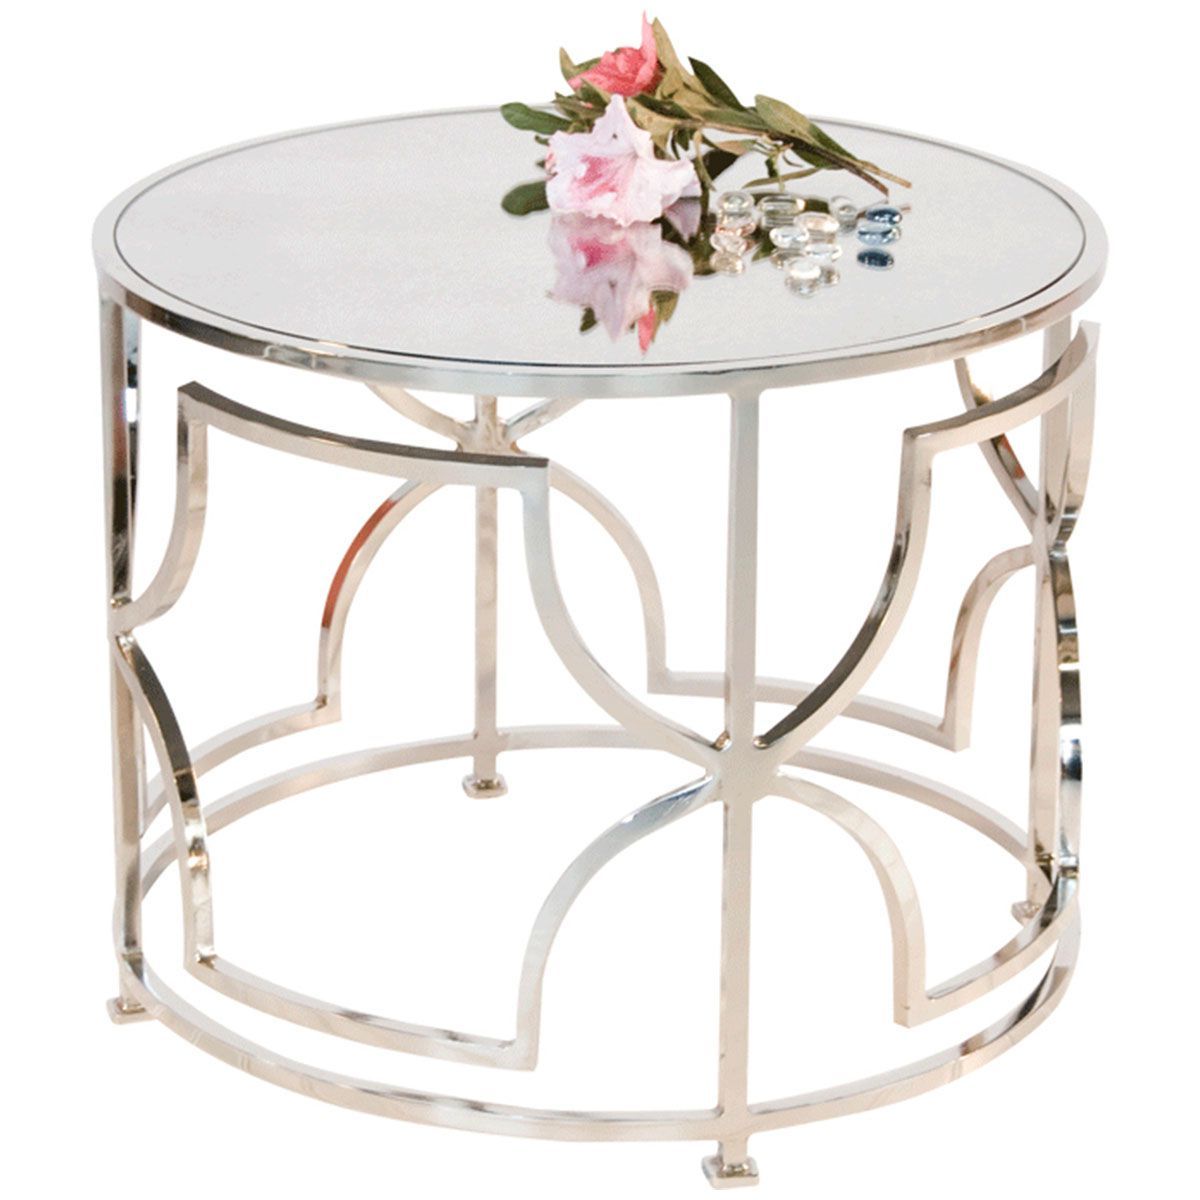 Popular Worlds Away Nickel Plated Round Cocktail Table With Regarding Mirrored Cocktail Tables (View 17 of 20)